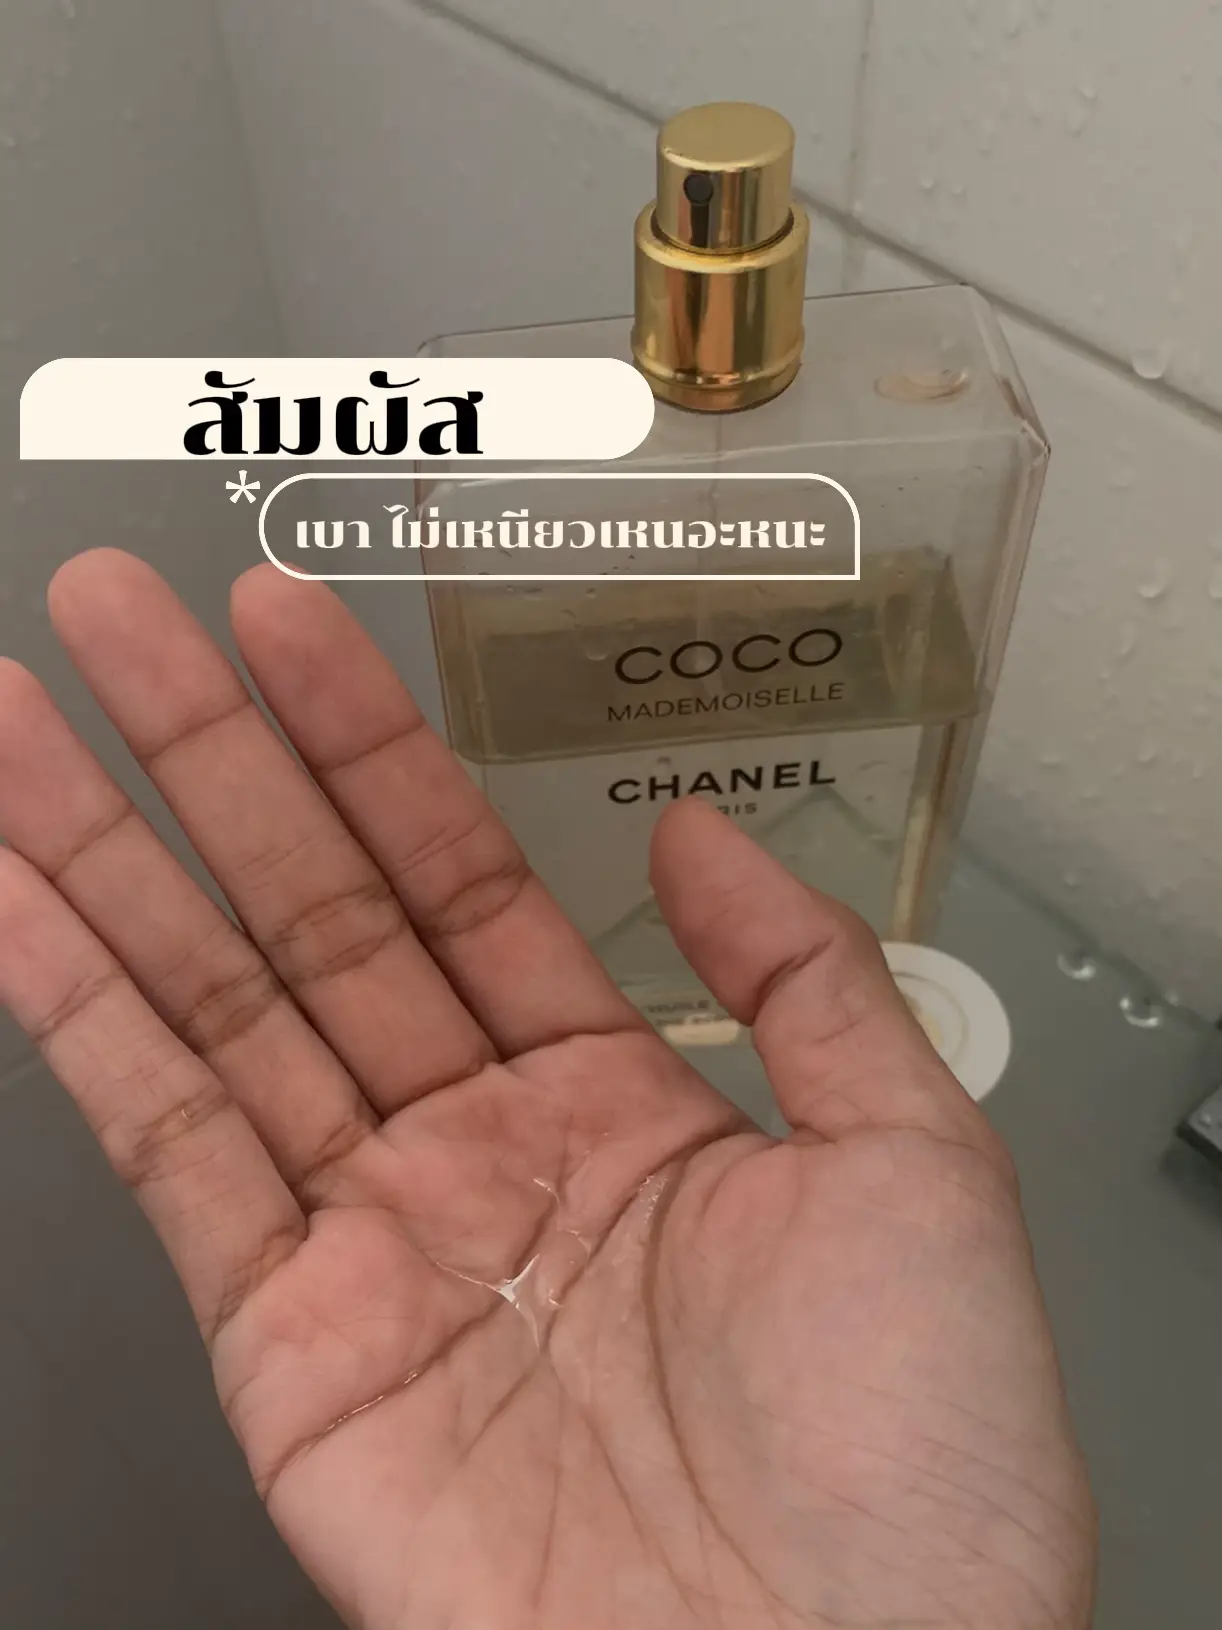 Chanel Coco Mademoiselle Body Lotion 200ml Body Lotion Clear